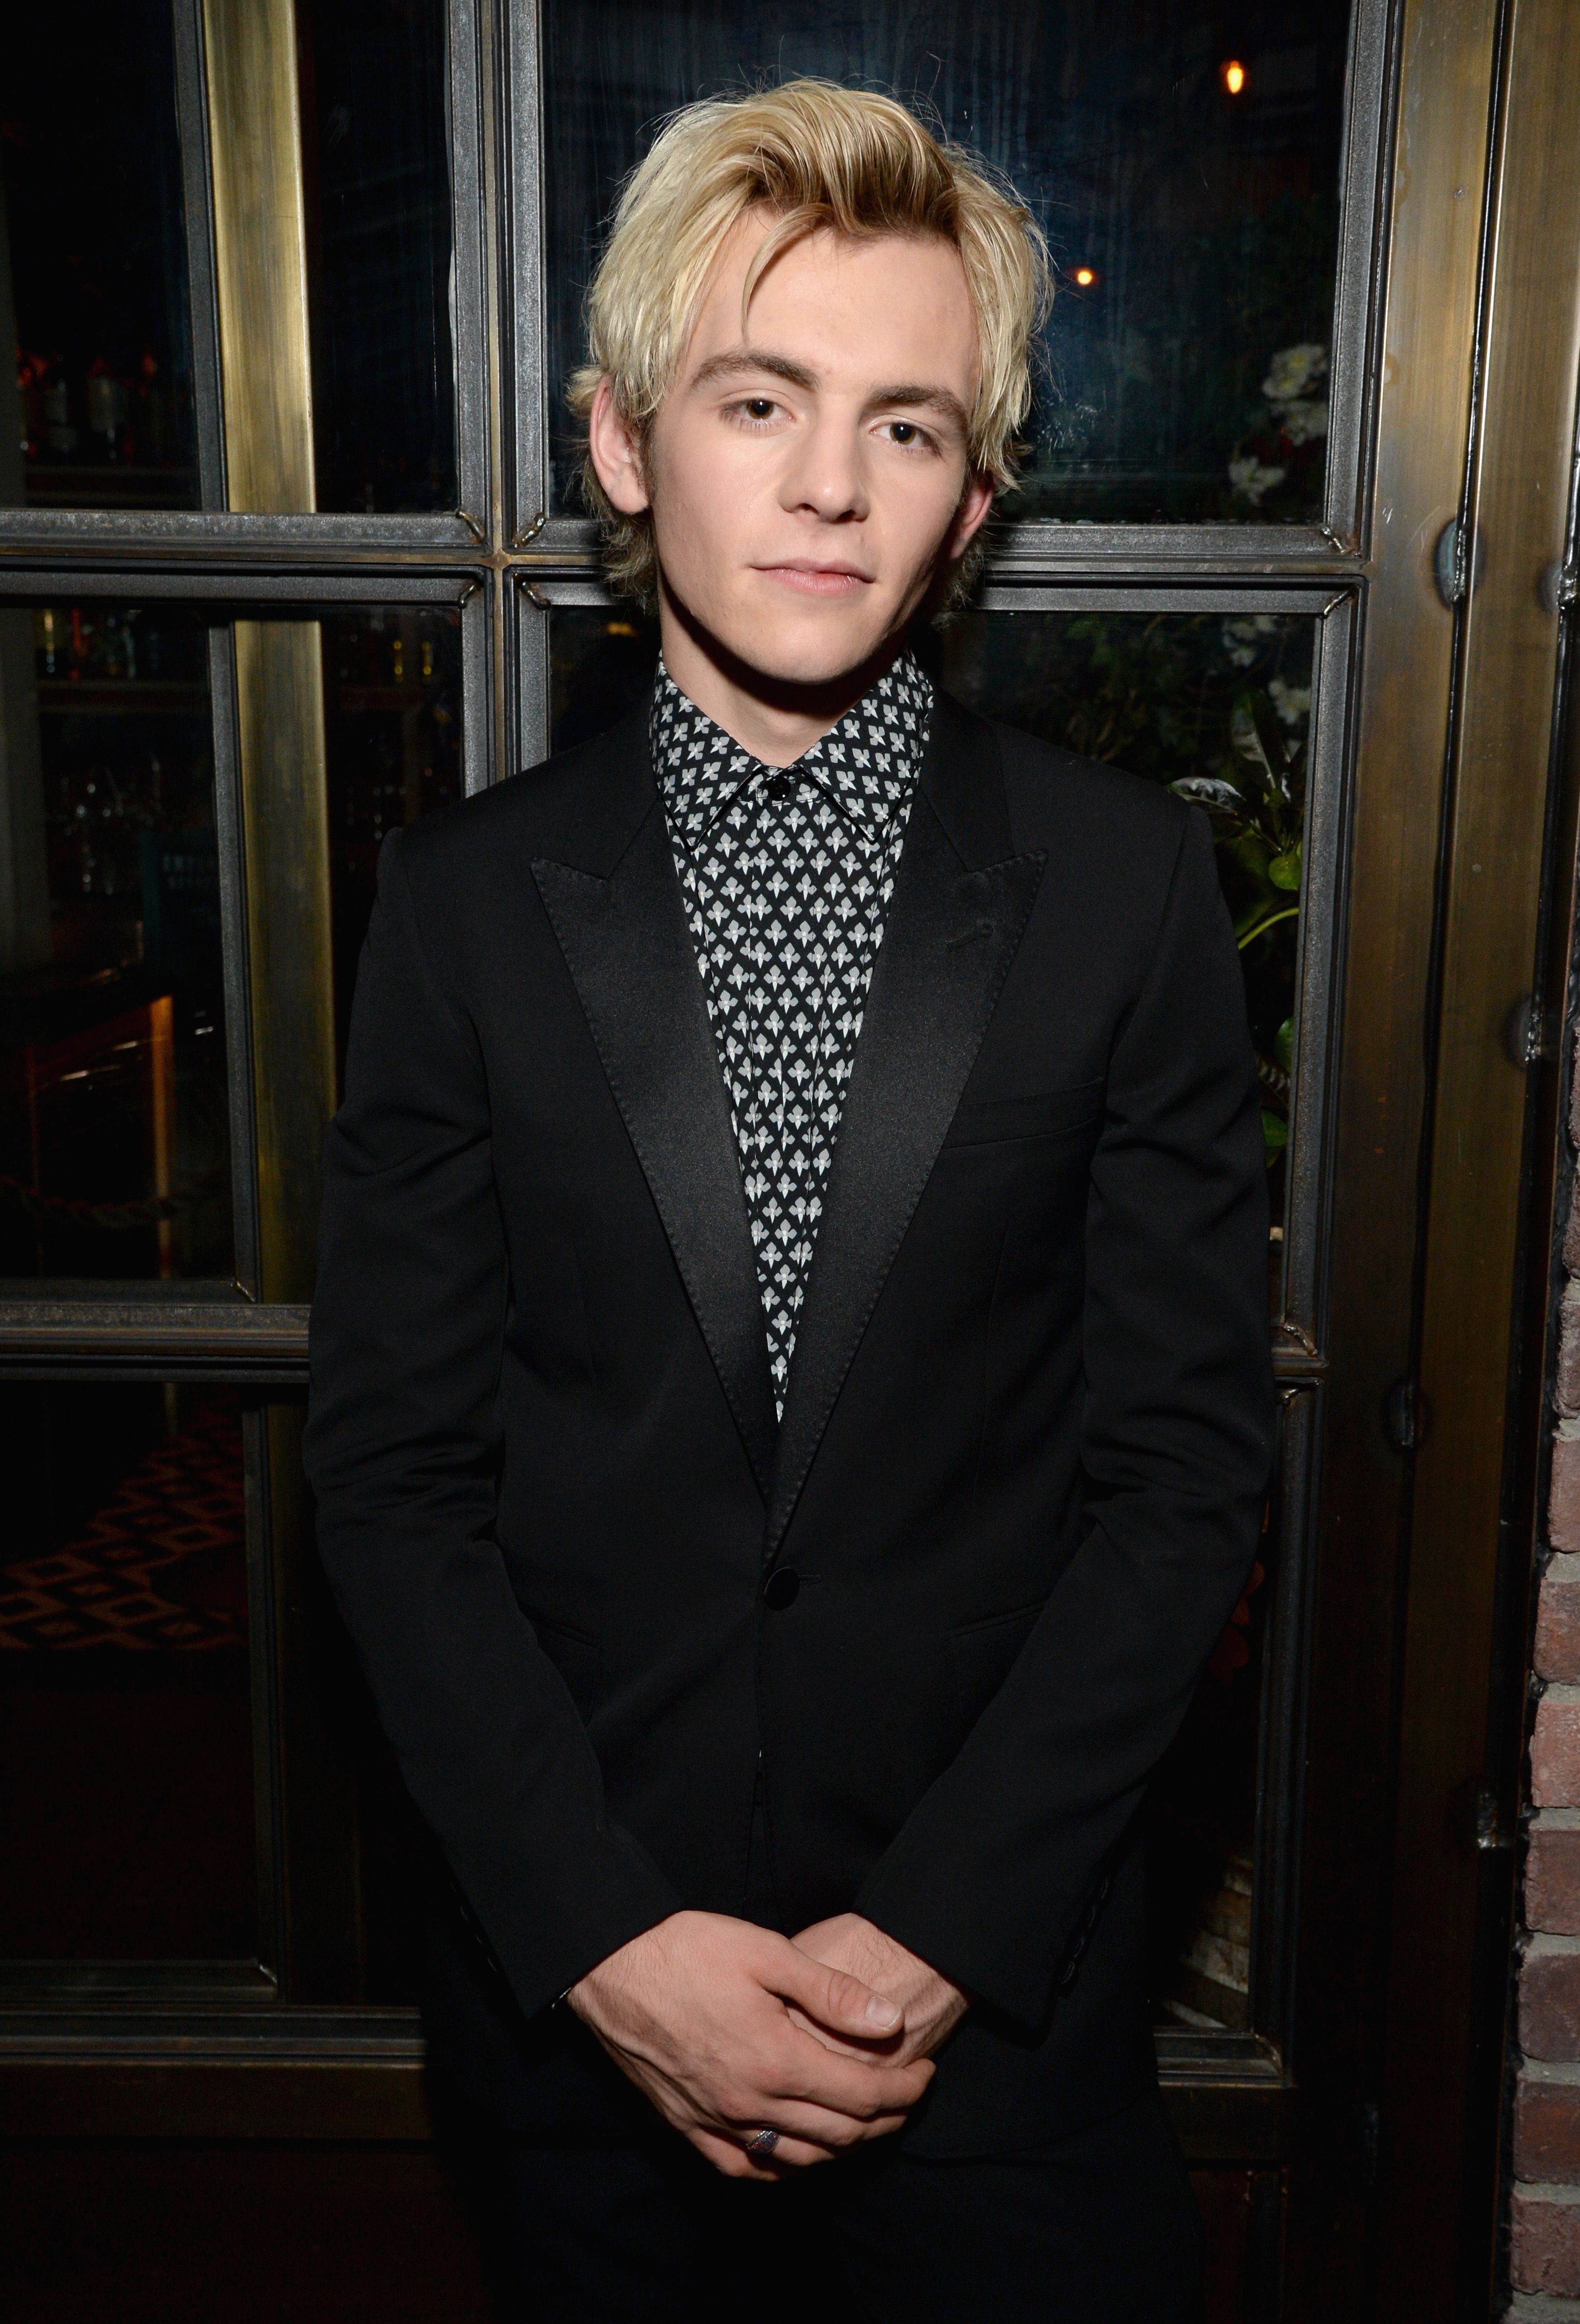 Lynch dating life is real who 2018 in ross Ross Lynch